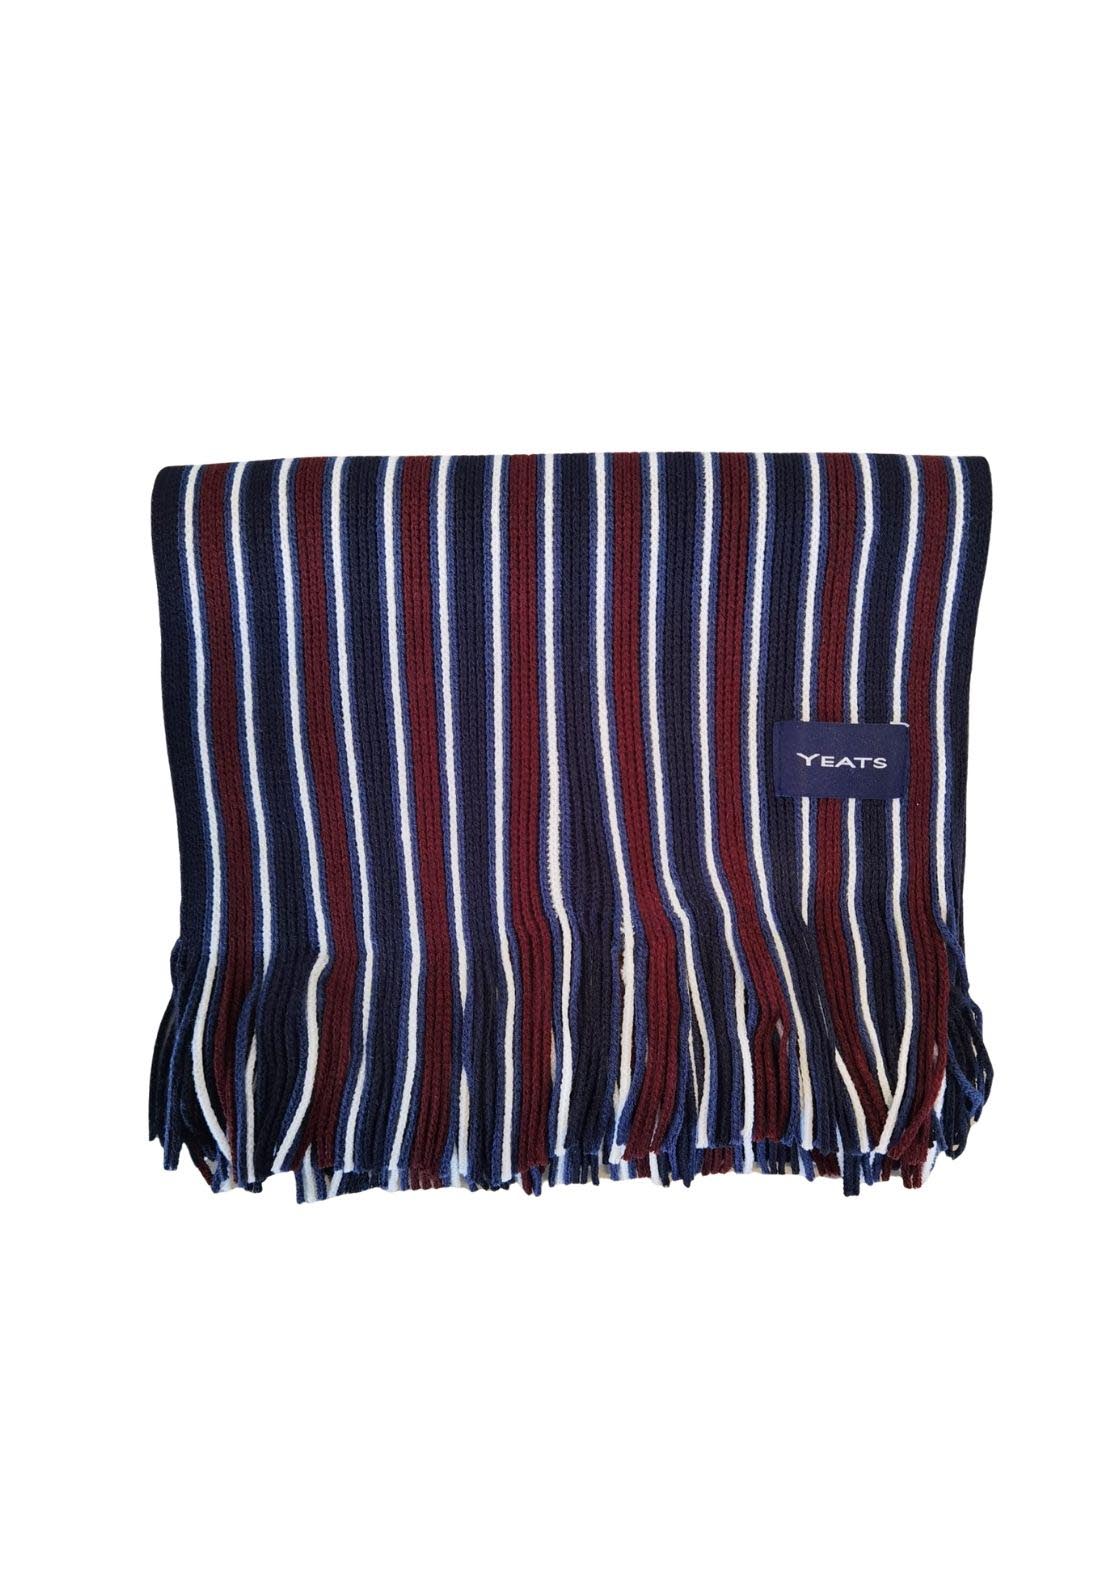 Yeats Boxed Scarves - Navy / Red 2 Shaws Department Stores